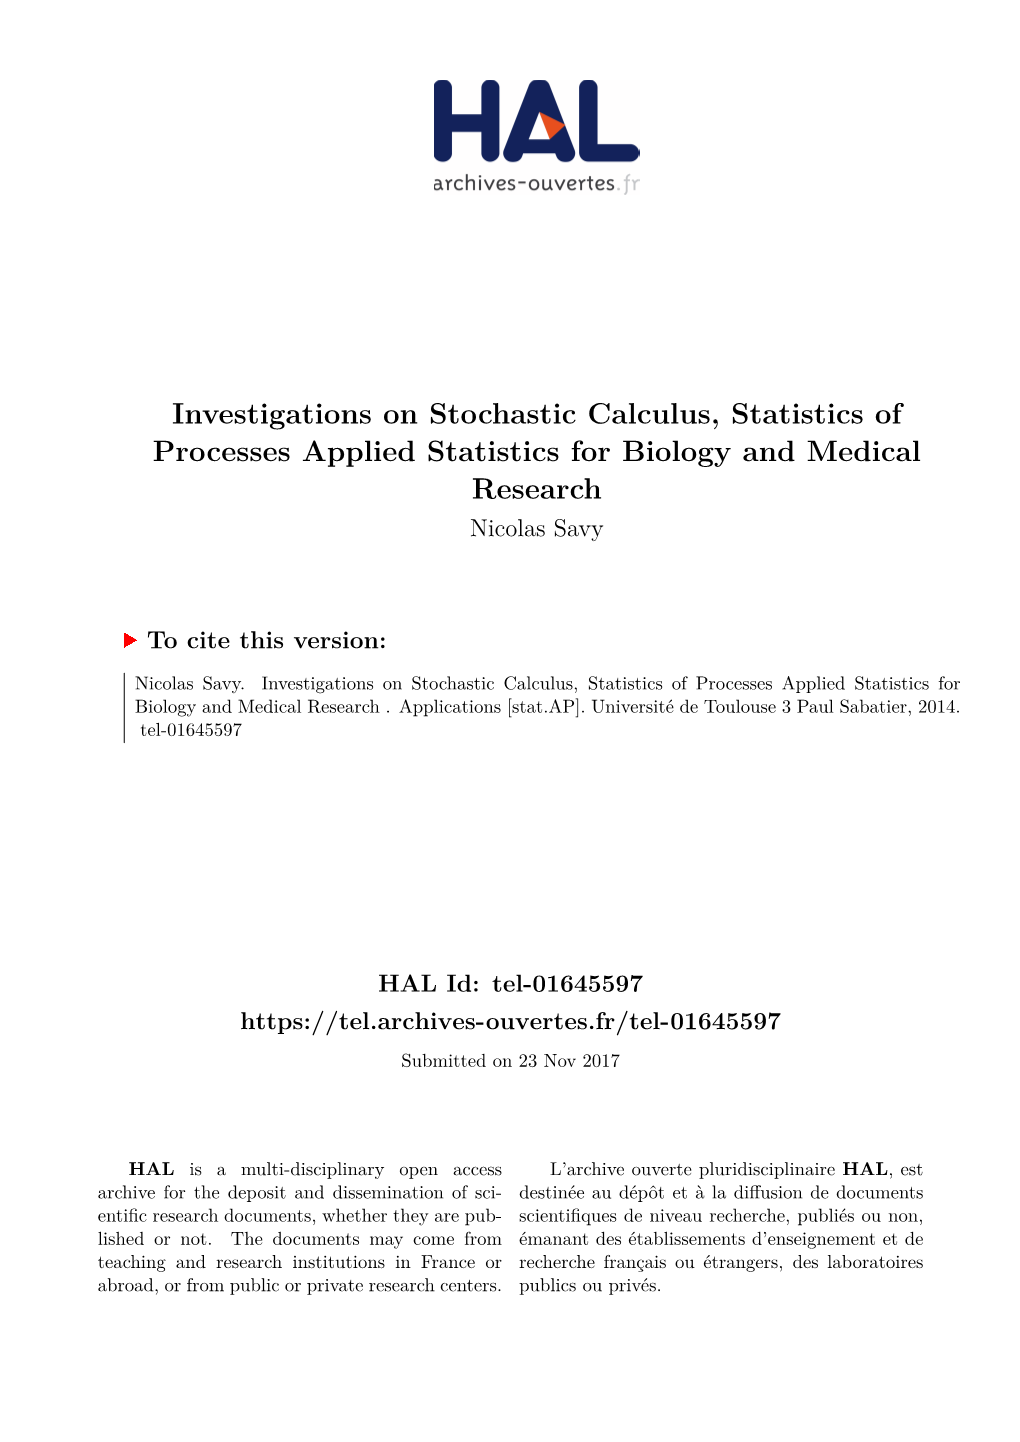 Investigations on Stochastic Calculus, Statistics of Processes Applied Statistics for Biology and Medical Research Nicolas Savy